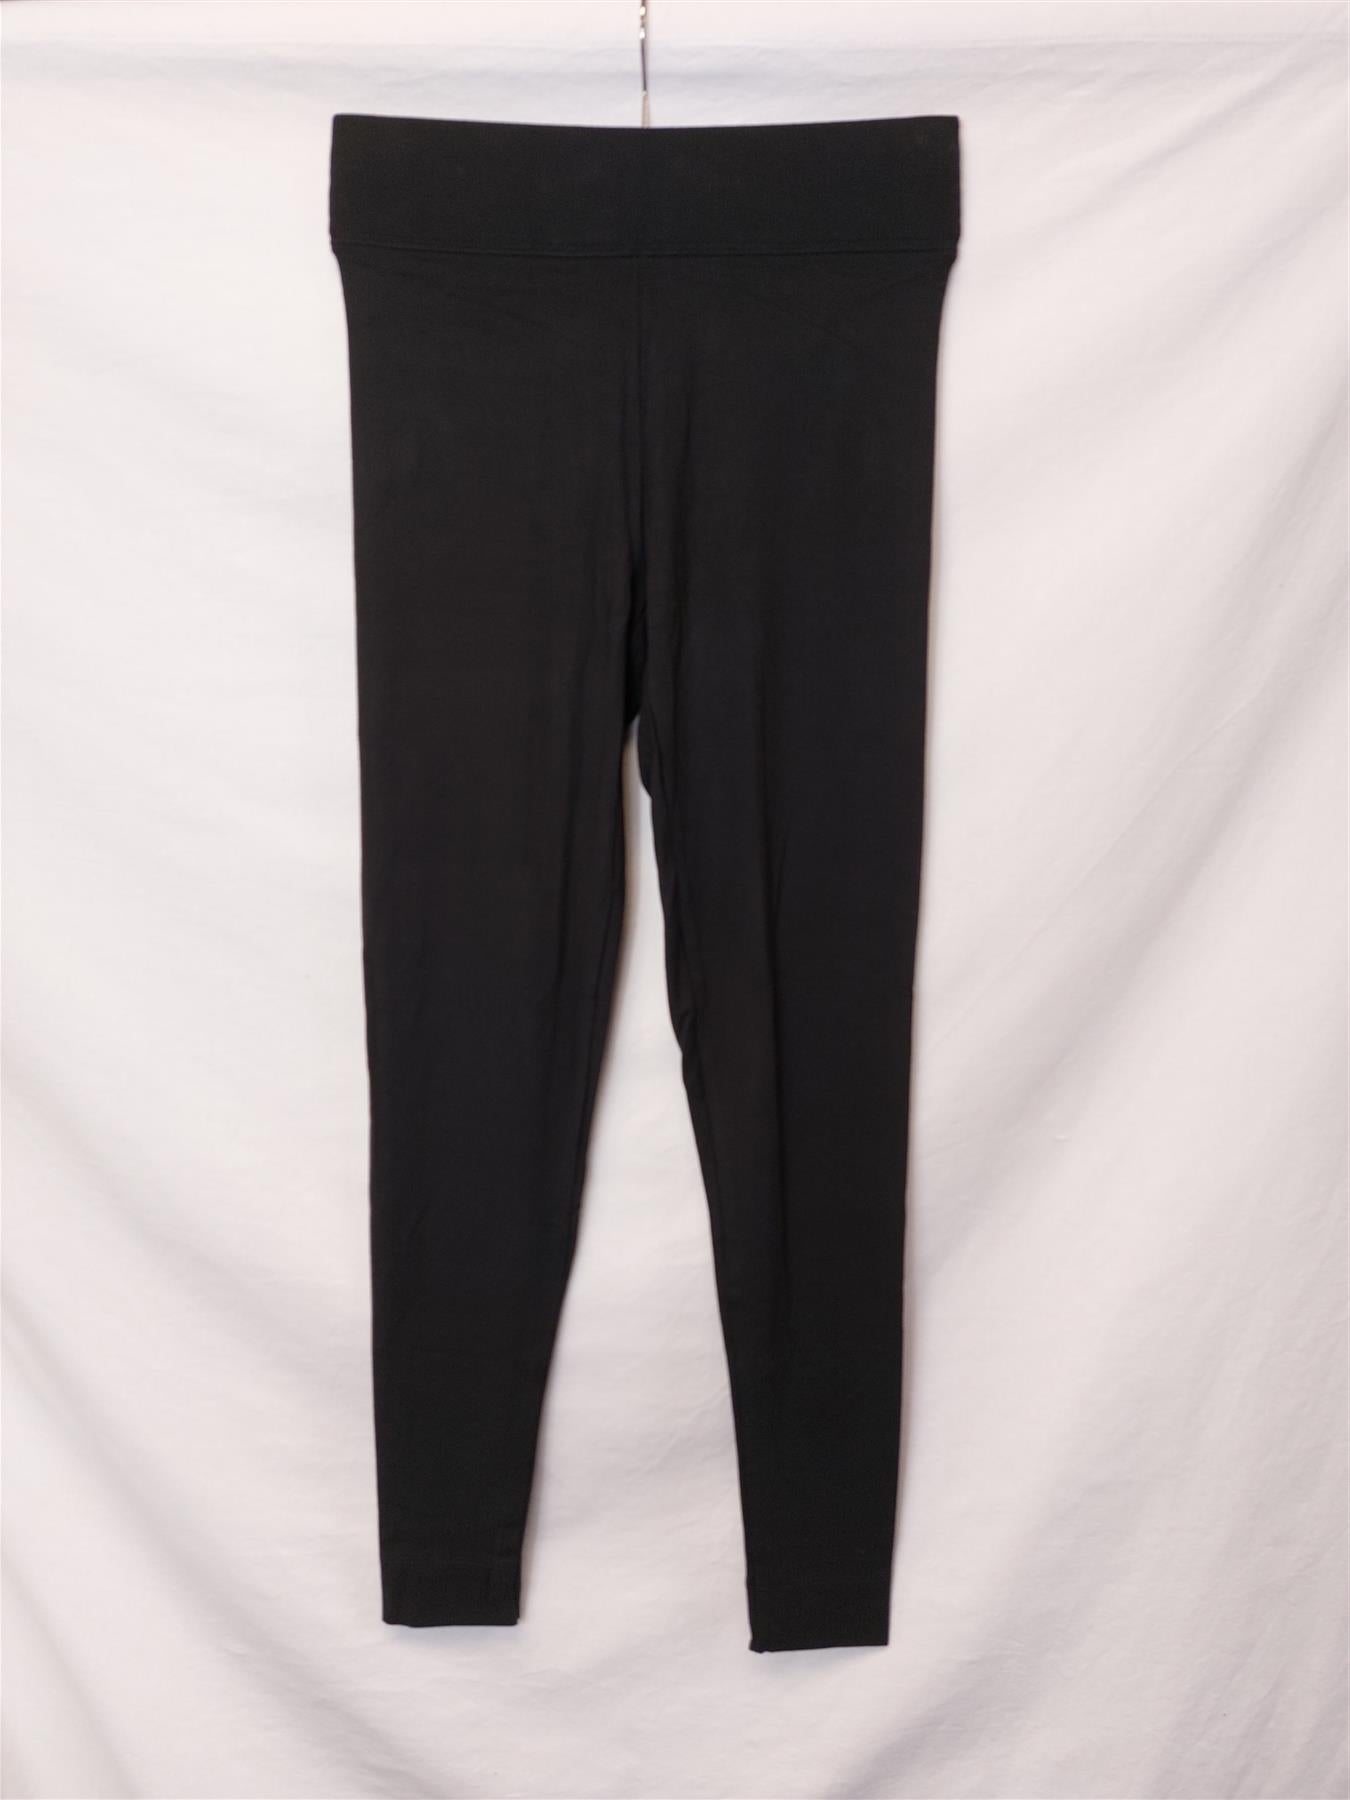 High Waisted Leggings Stretch Comfort Sport Casual Gym Yoga Collection